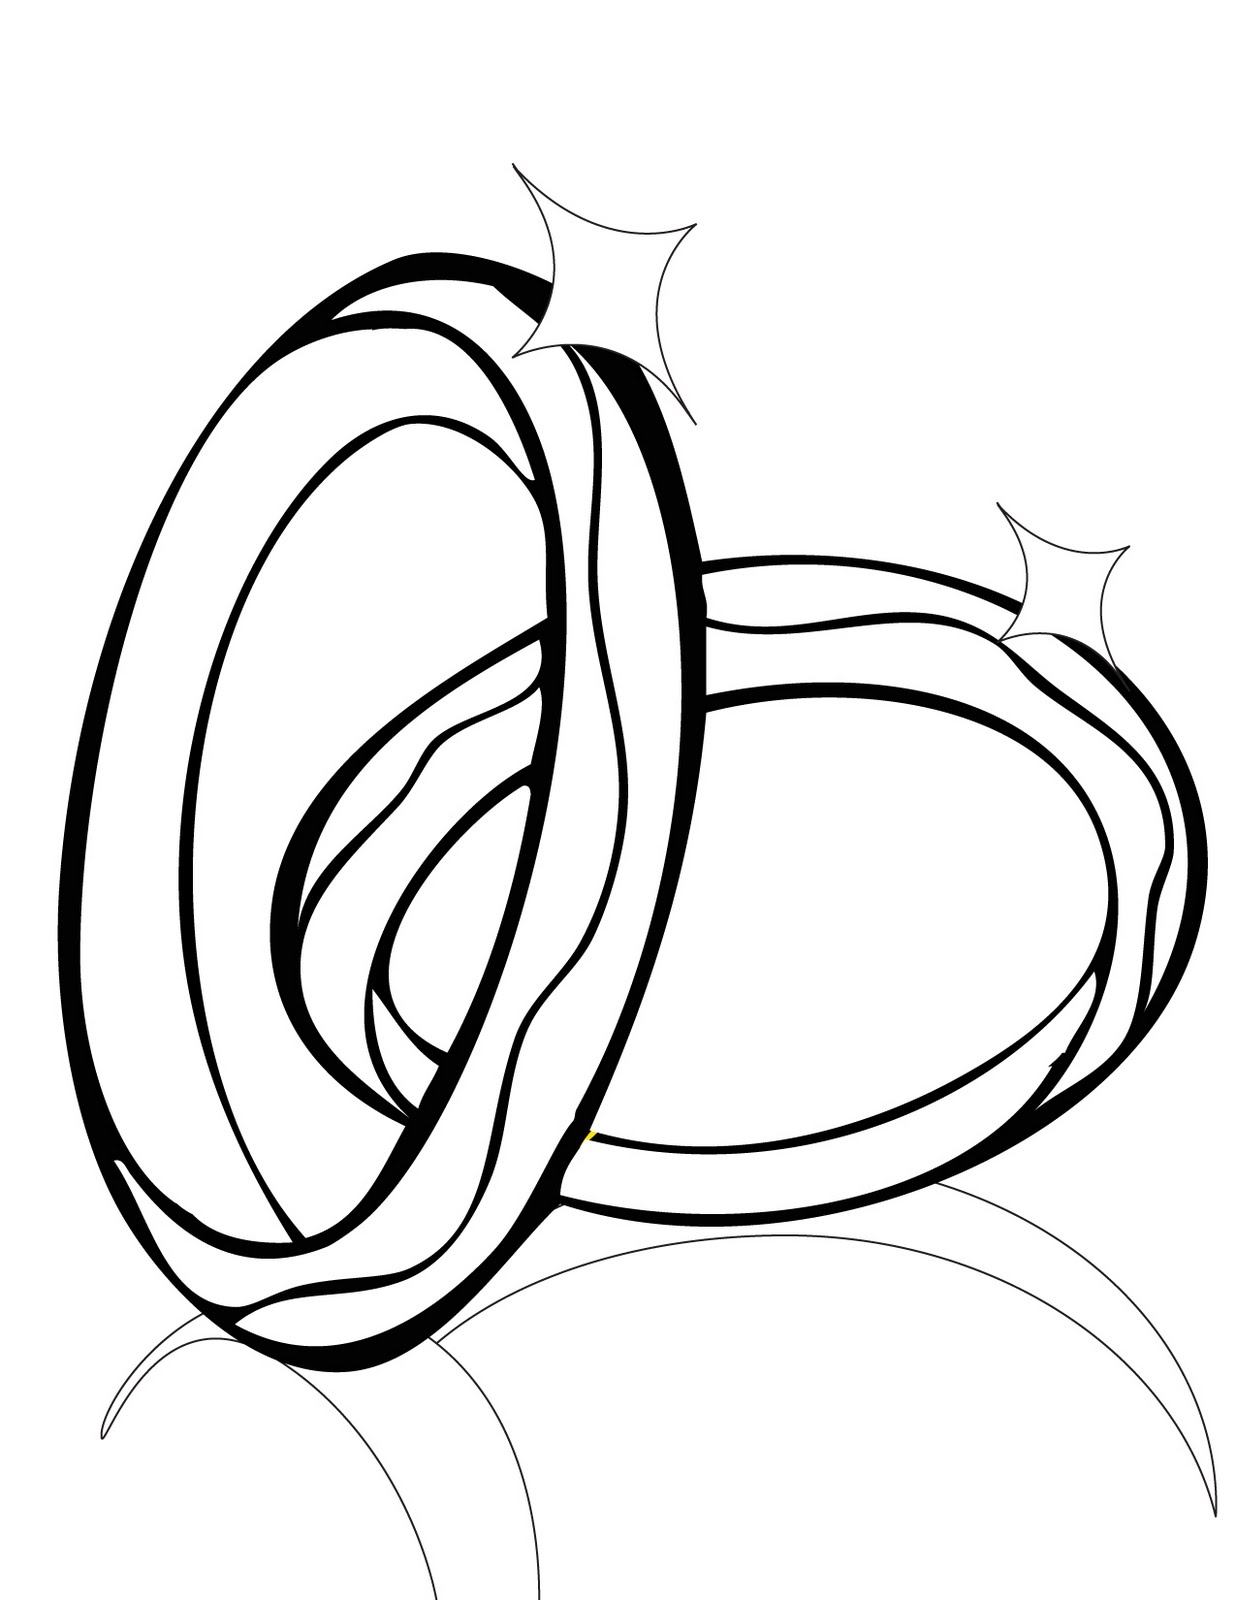 Fun Coloring Pages: Wedding Coloring Pages - Wedding Ring